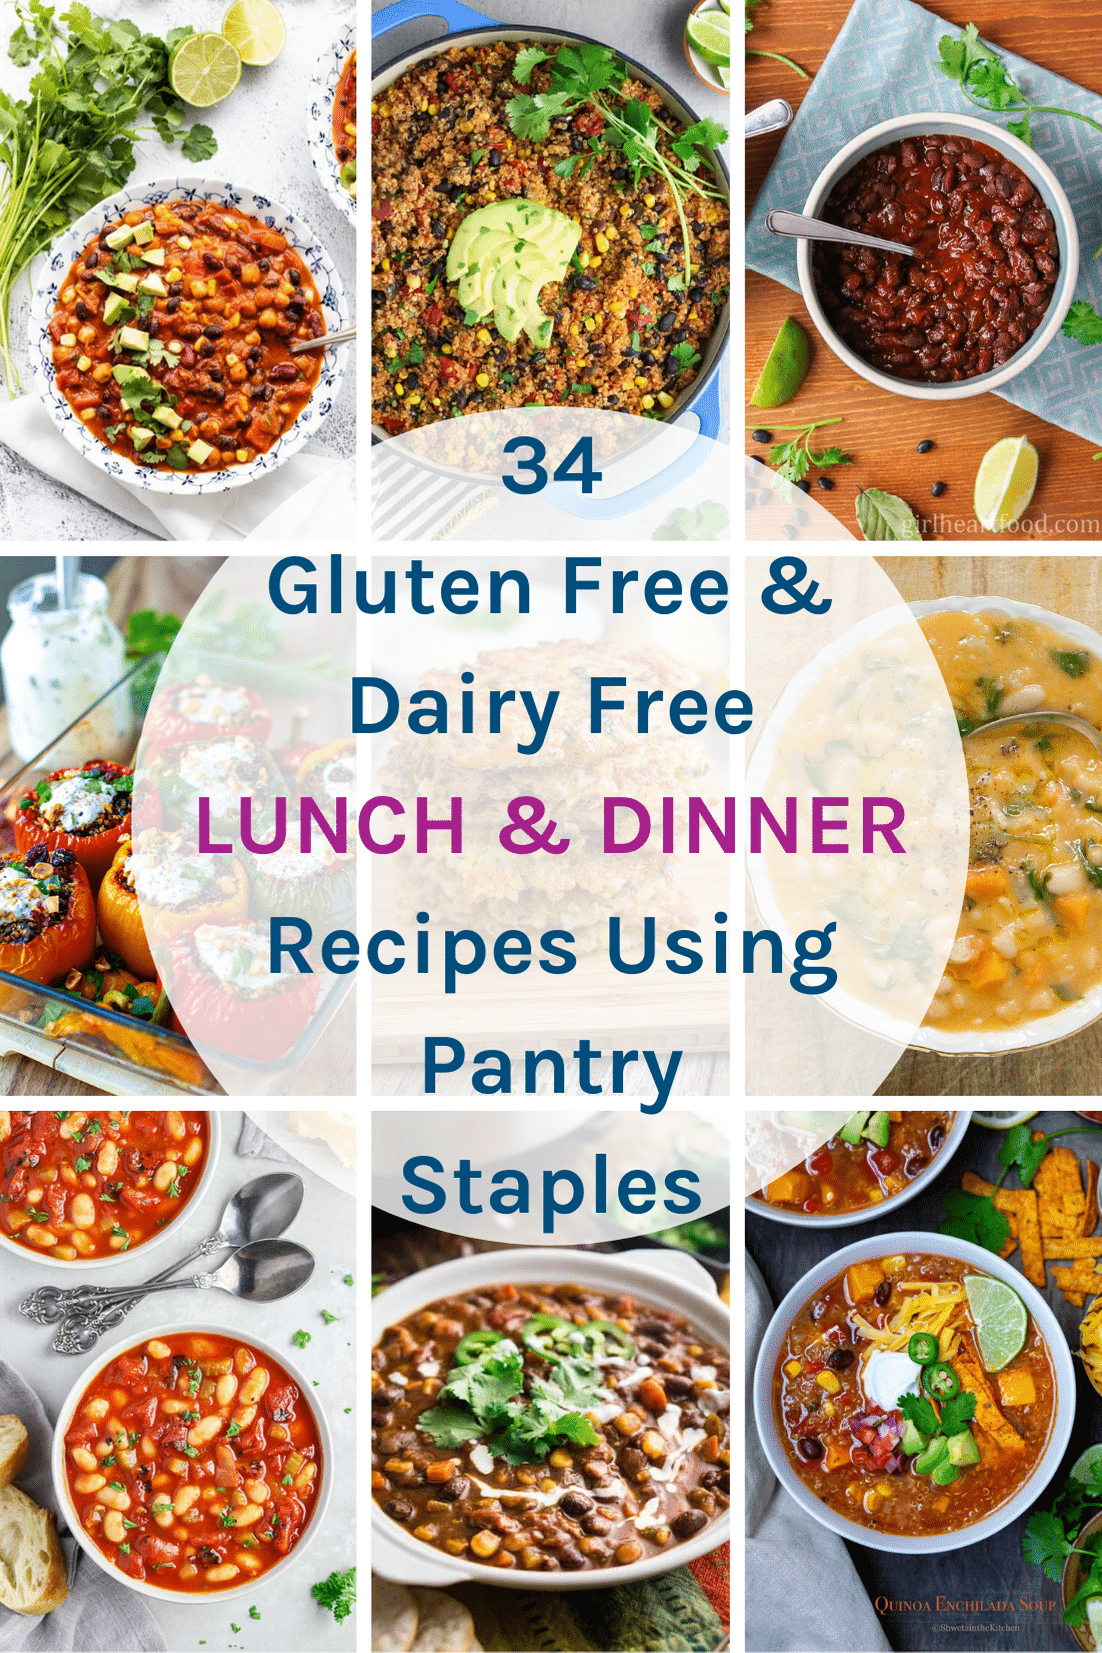 34 Gluten Free Dairy Free Lunch & Dinner Recipes Using Pantry Staples with some of the recipe images.